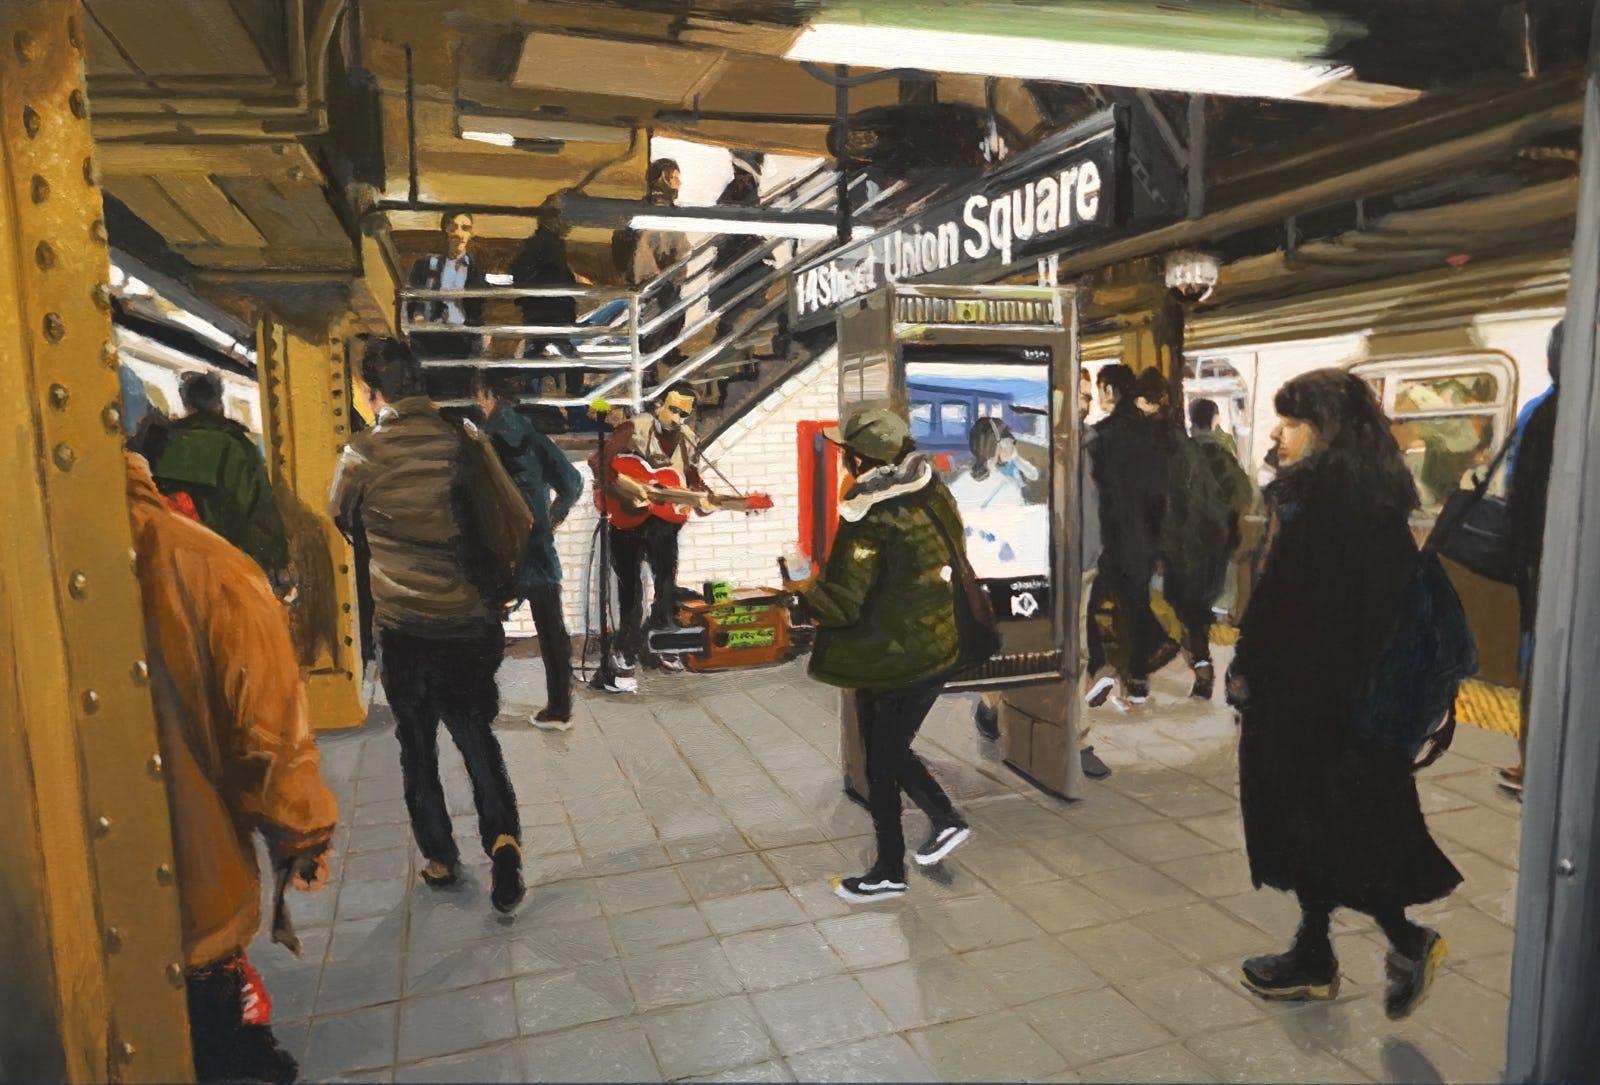 Seth Tane's realist oil on panel painting, "Union Square Blues," instantly transports the viewer to a bustling New York City subway station. Warmth emanates from the golden color of the pillars and bathes the scene in rich tones. Slightly off center